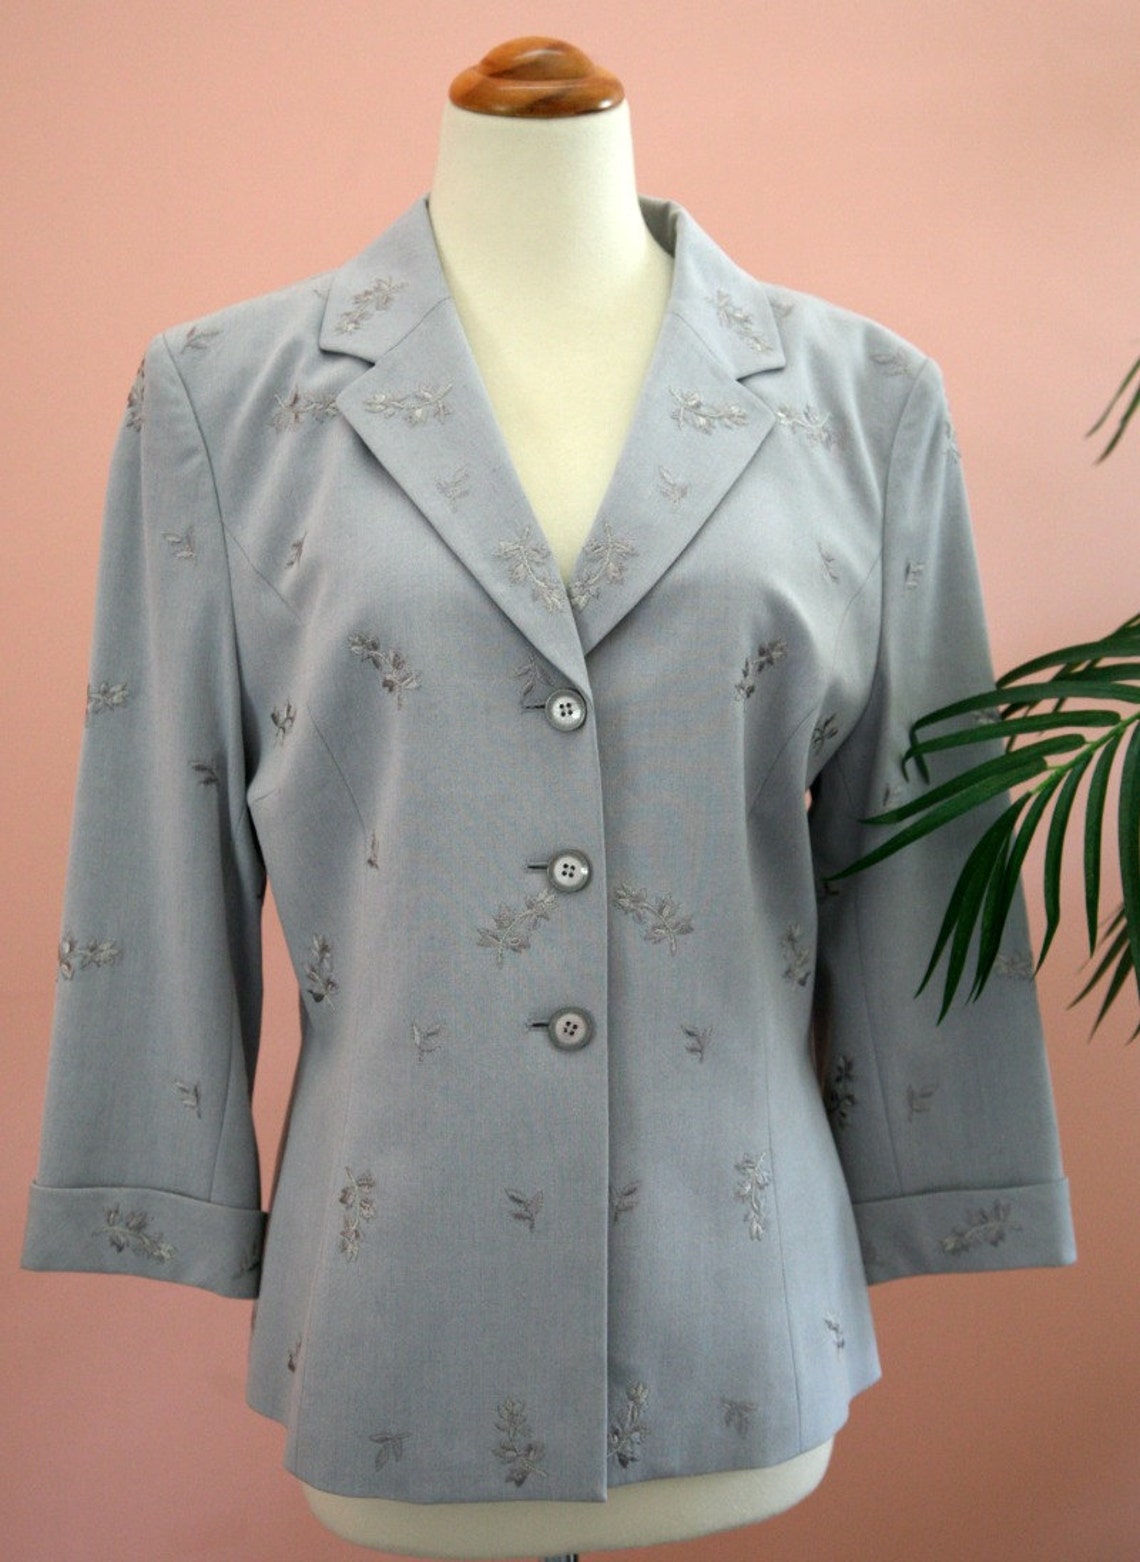 Ladies Light Silver Grey Blazer Embellished With Embroidered - Etsy